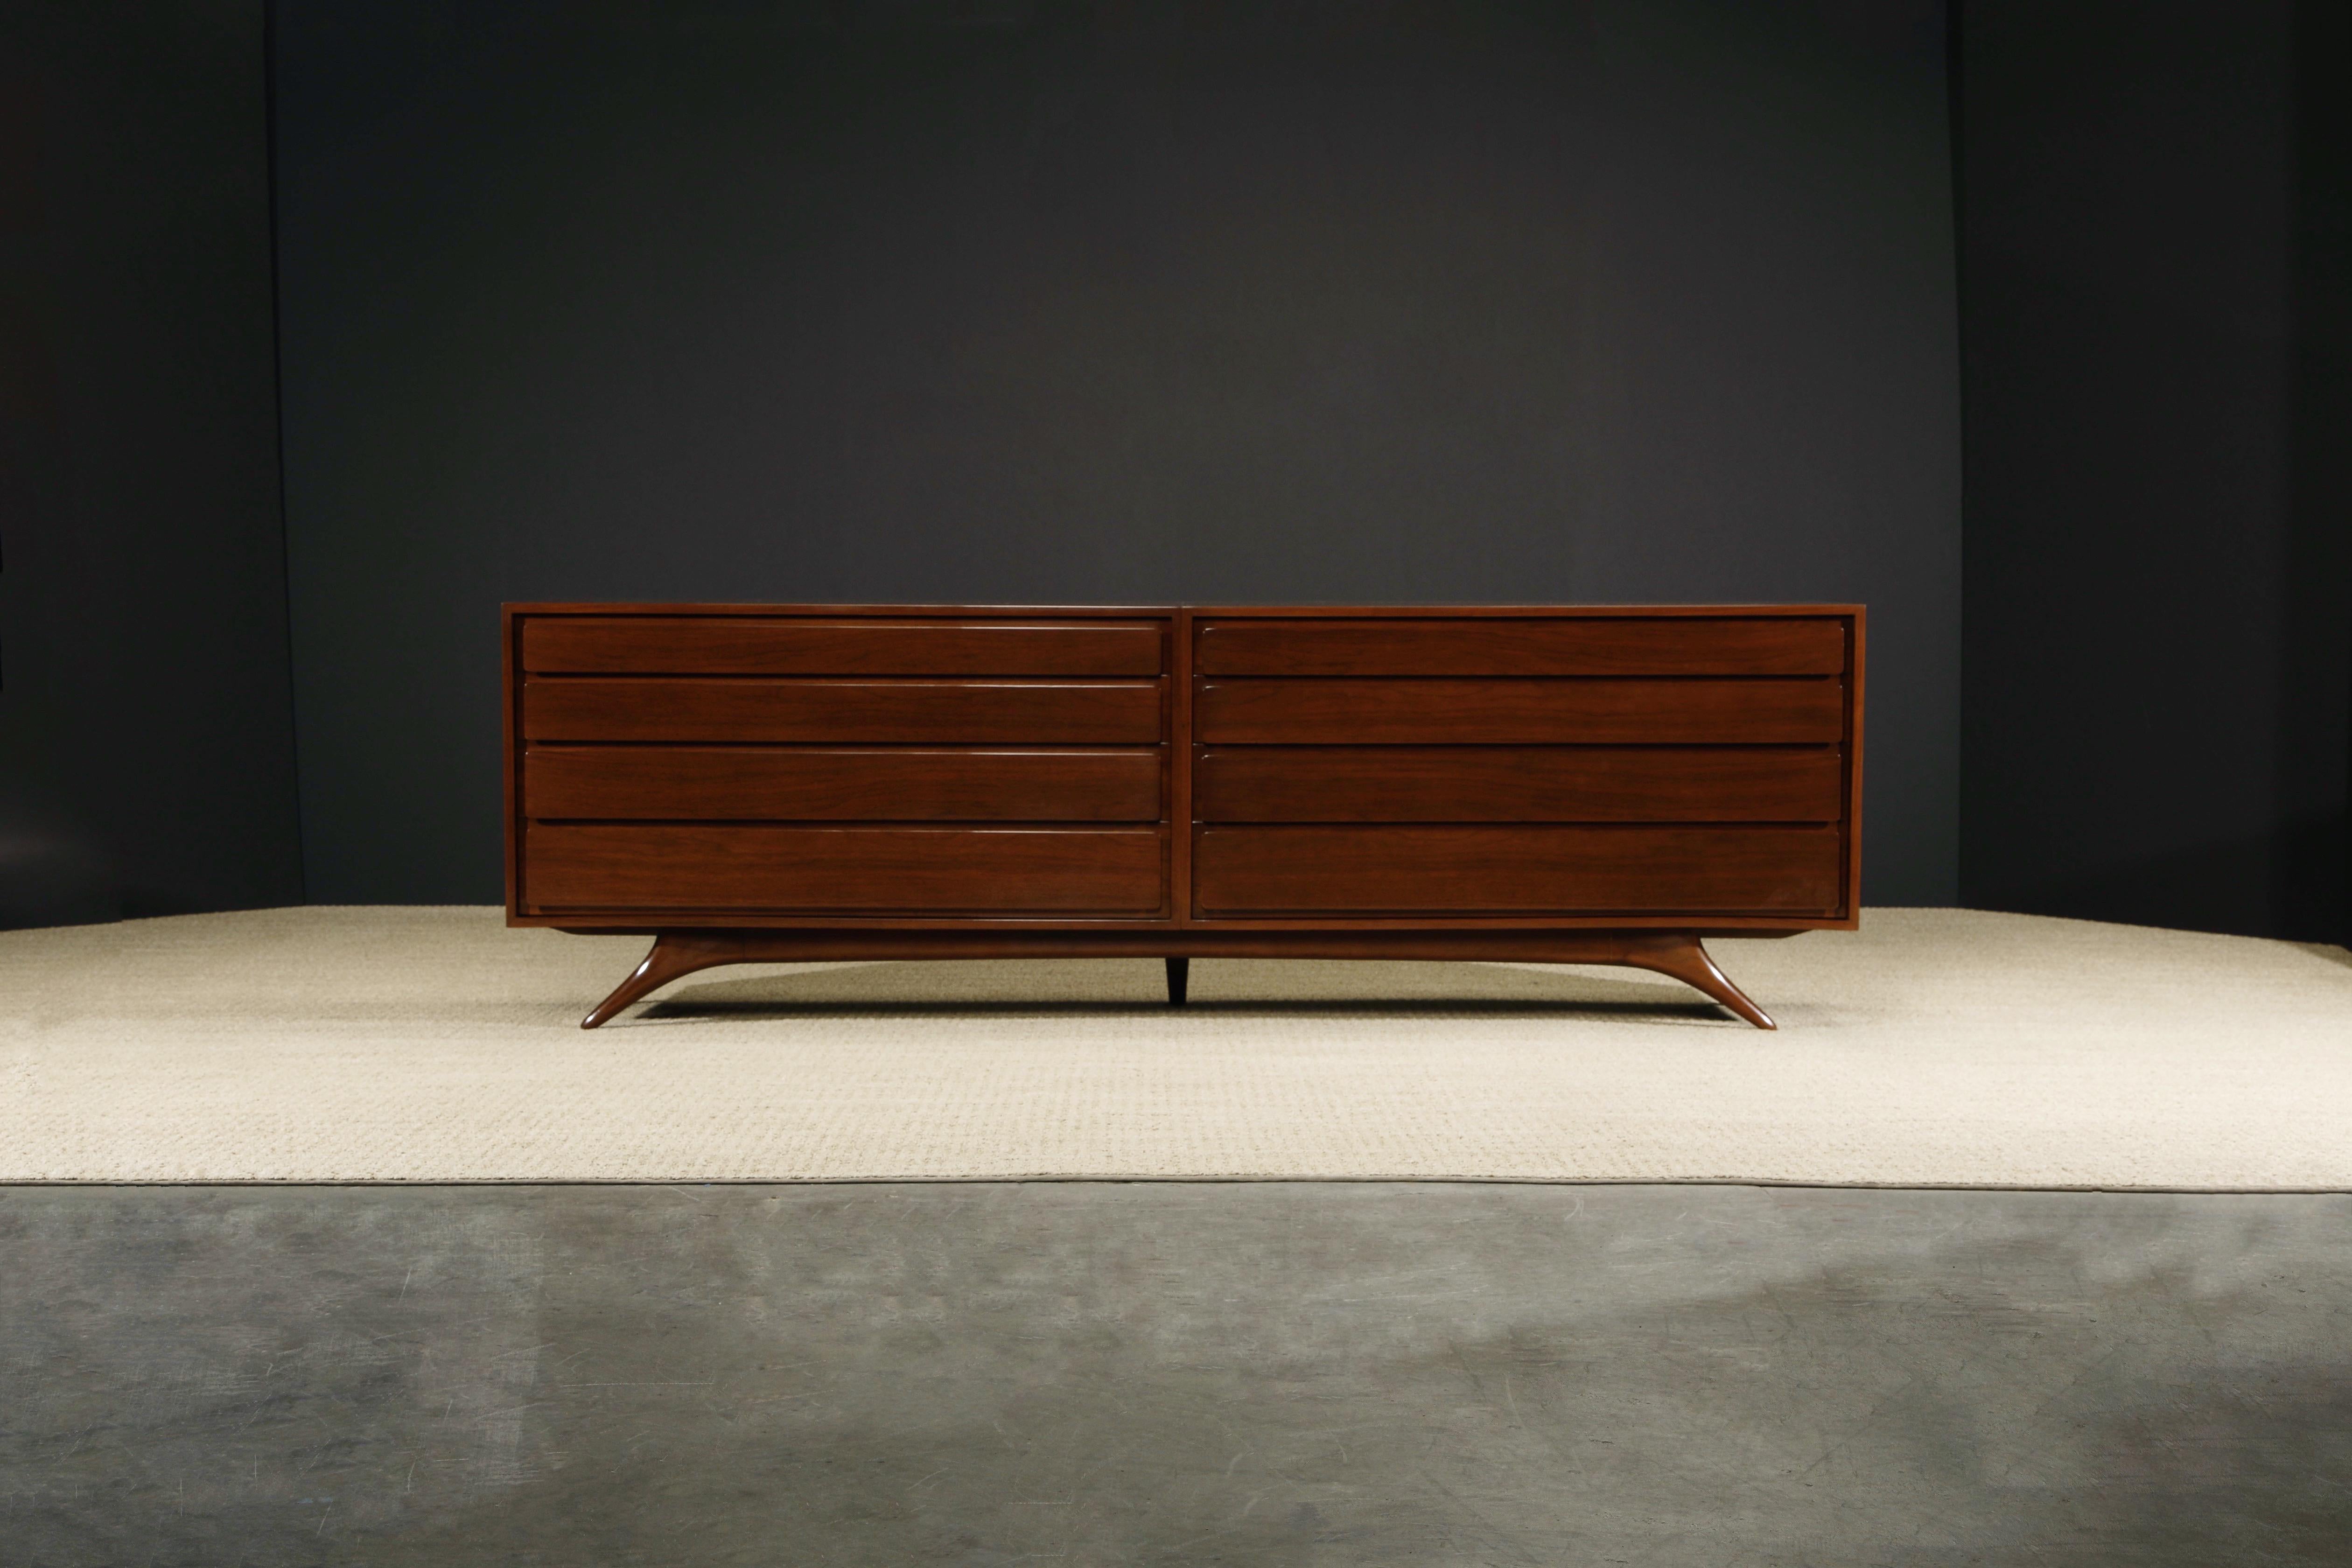 This very rare and important sculptural double dresser was designed by Vladimir Kagan and handcrafted by Kagan-Dreyfuss Inc during the 1950s in New York. Each of the two chests are signed on the back with Kagan-Dreyfuss New York stamps. Expansive